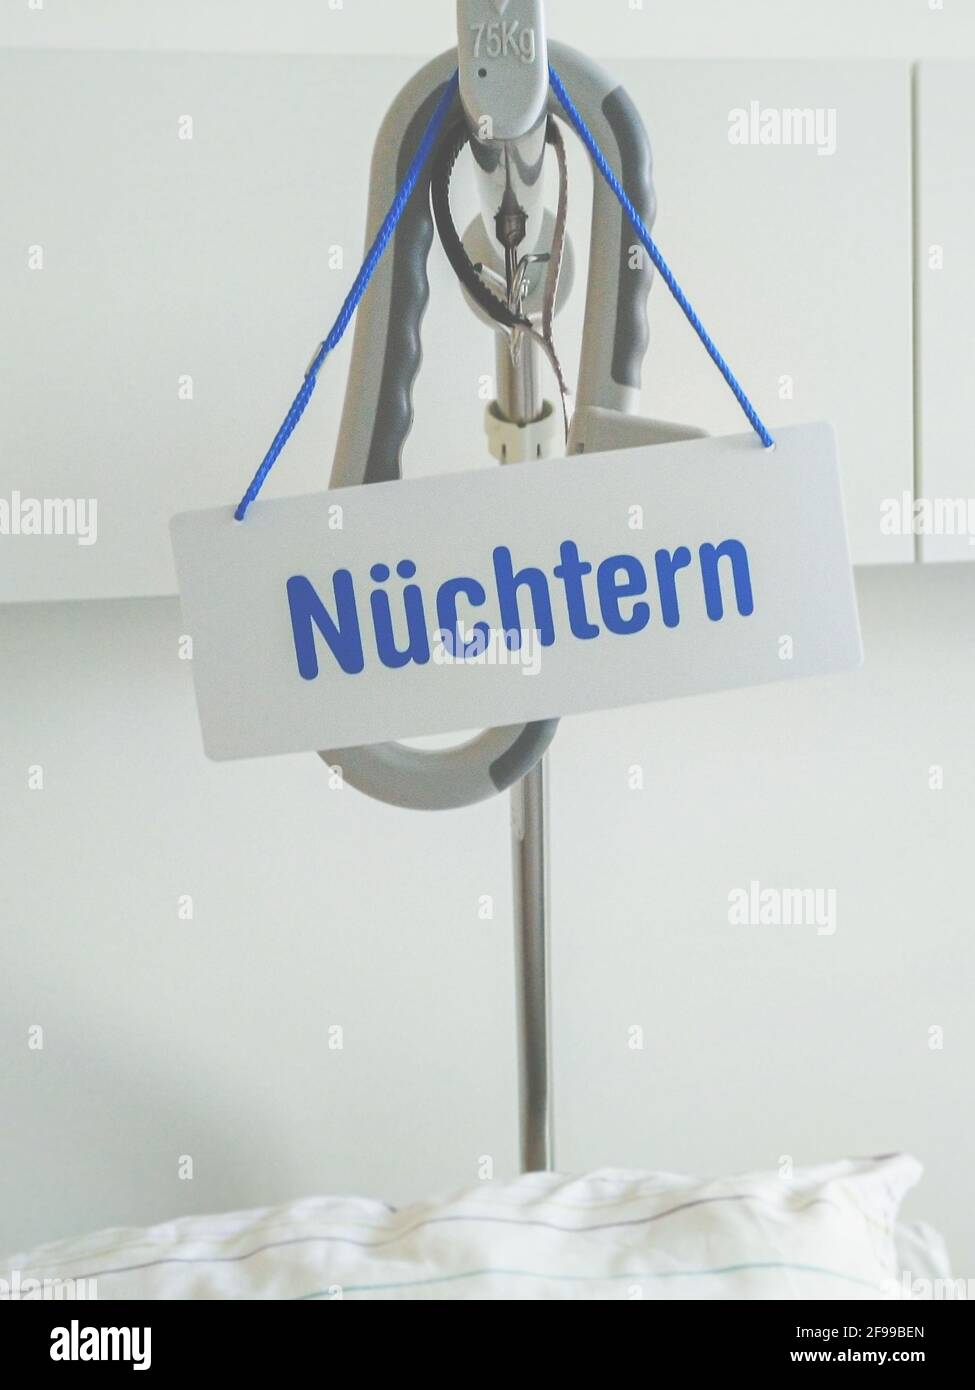 A sign reading Be sober hangs over a hospital bed prior to surgery Stock Photo